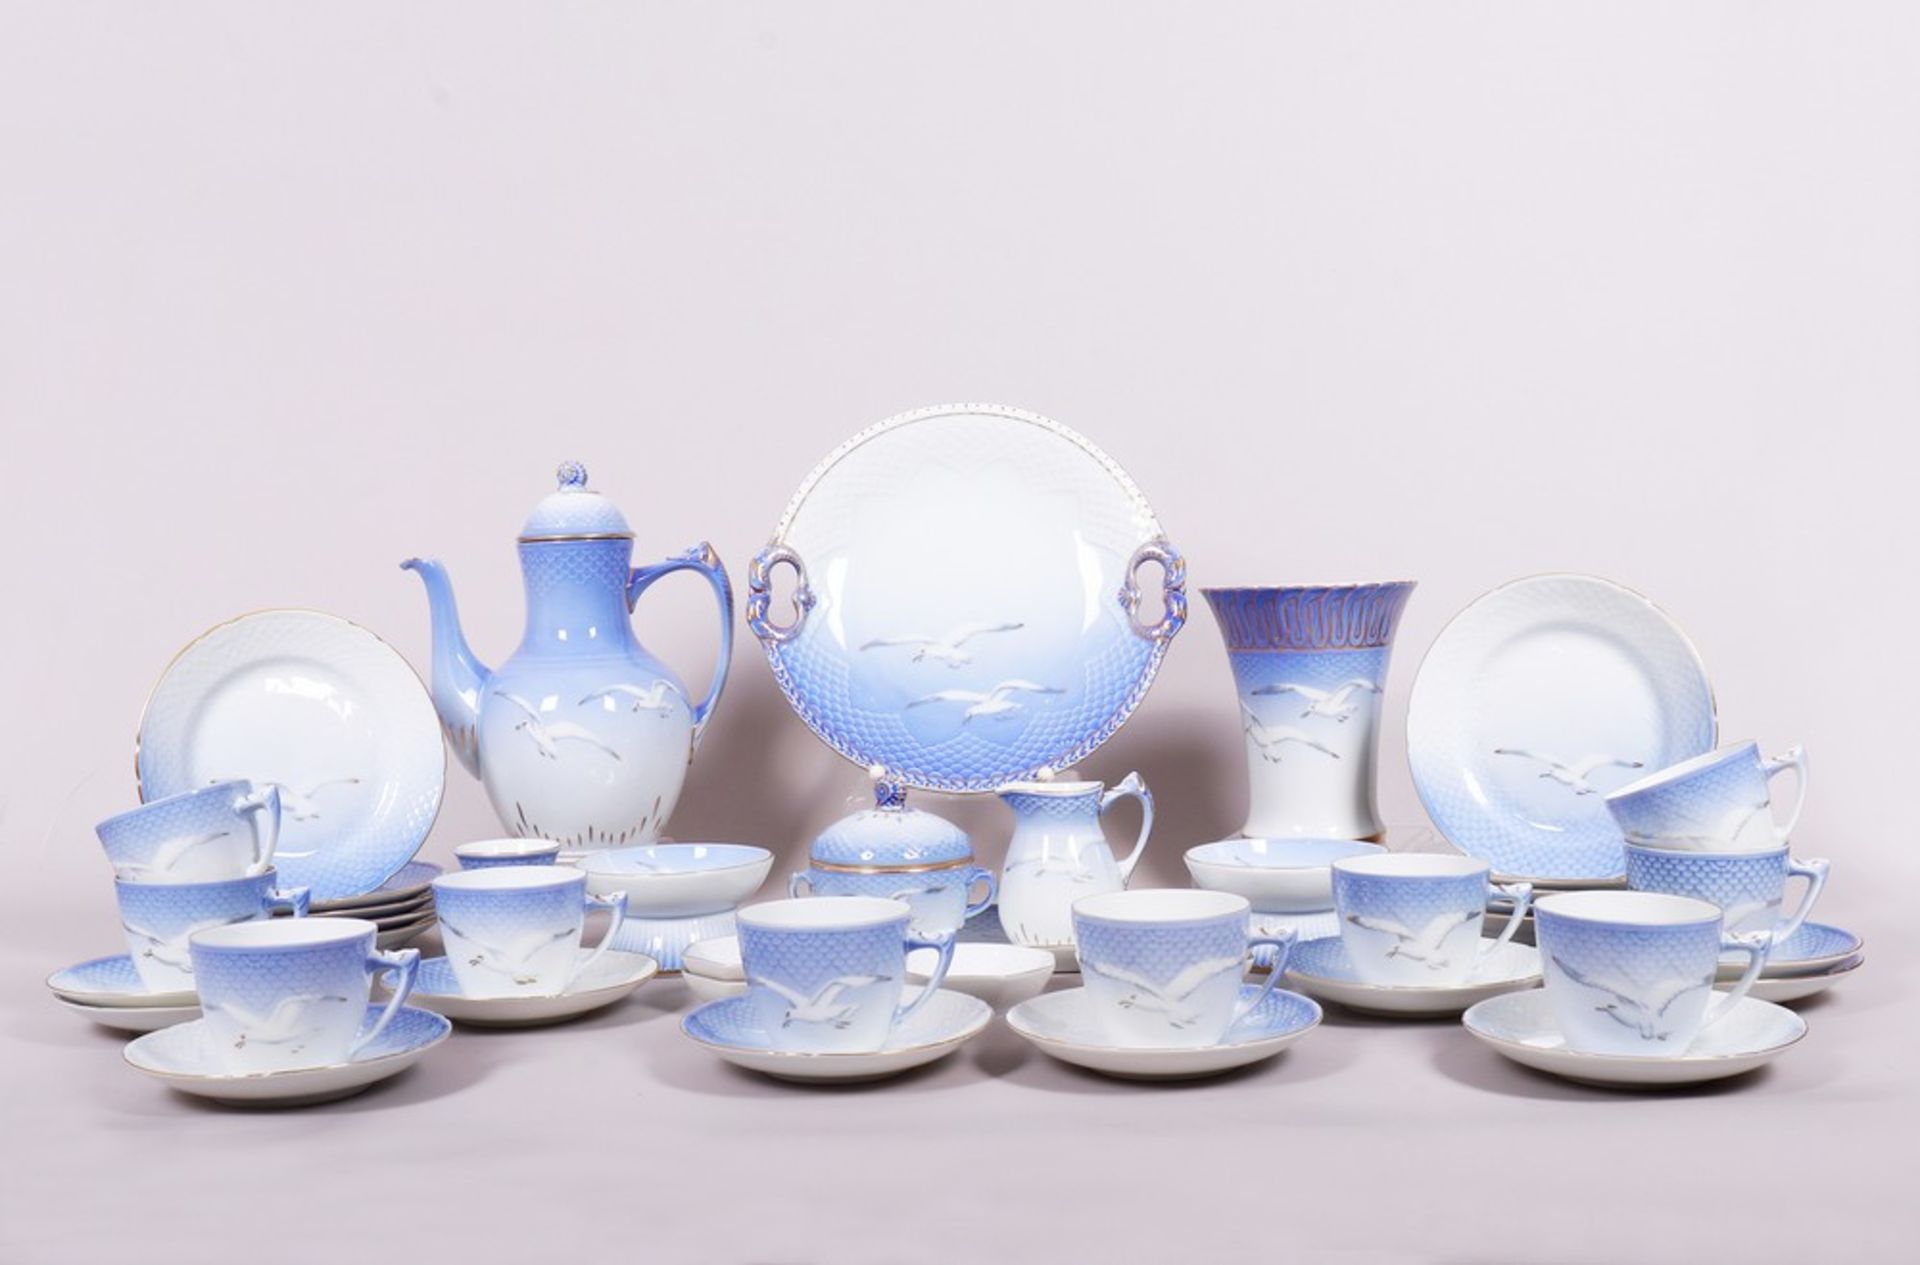 Coffee service for 10 people, design Fanny Garde for Bing & Grondahl, decor “Seagull”, 20th C.